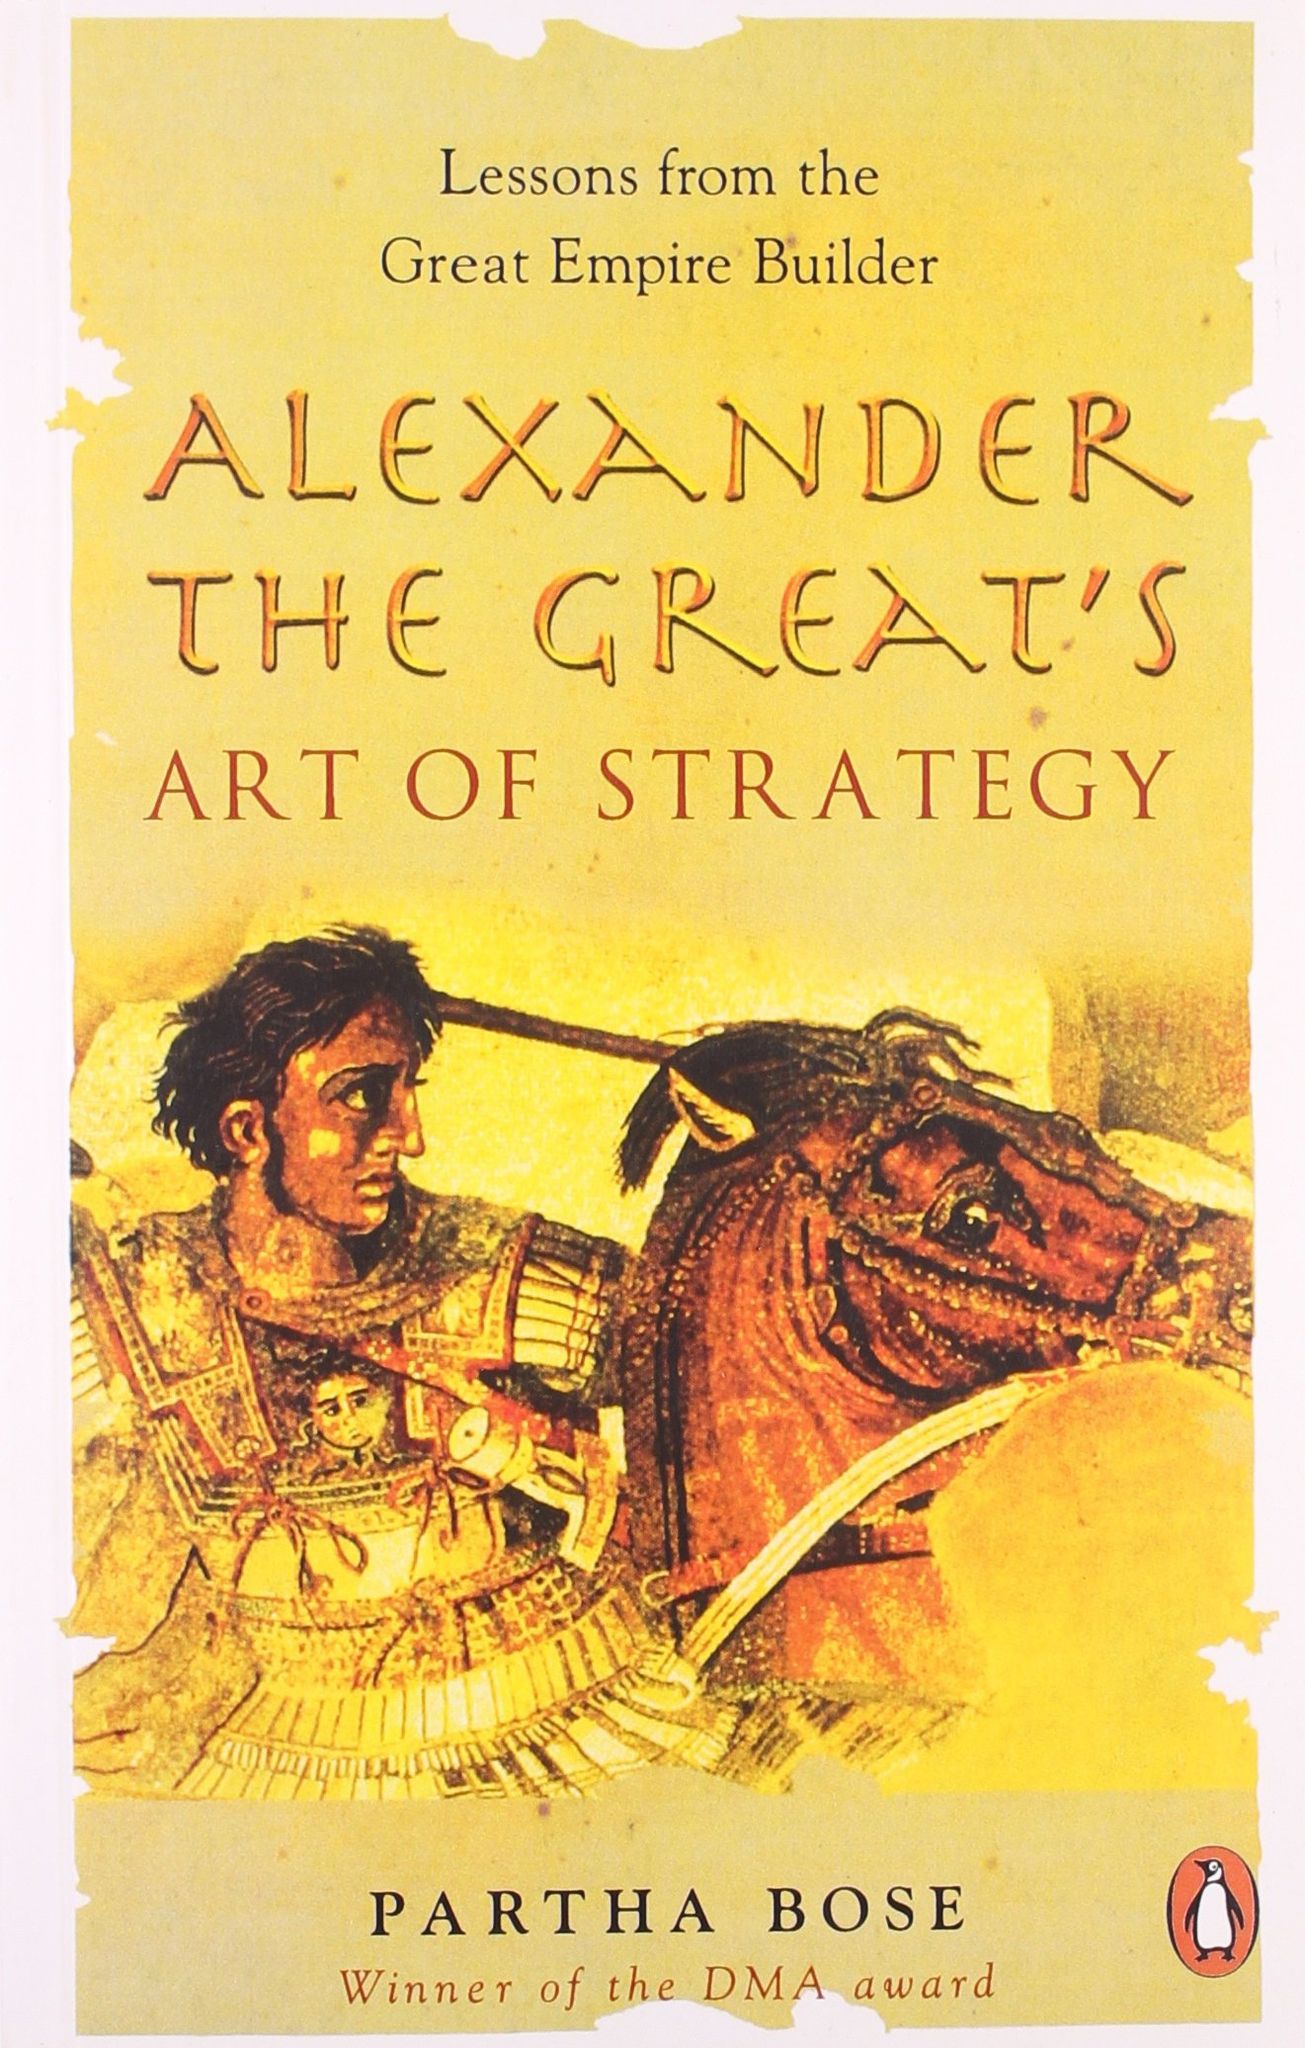 Alexander The Great's Art Of Strategy